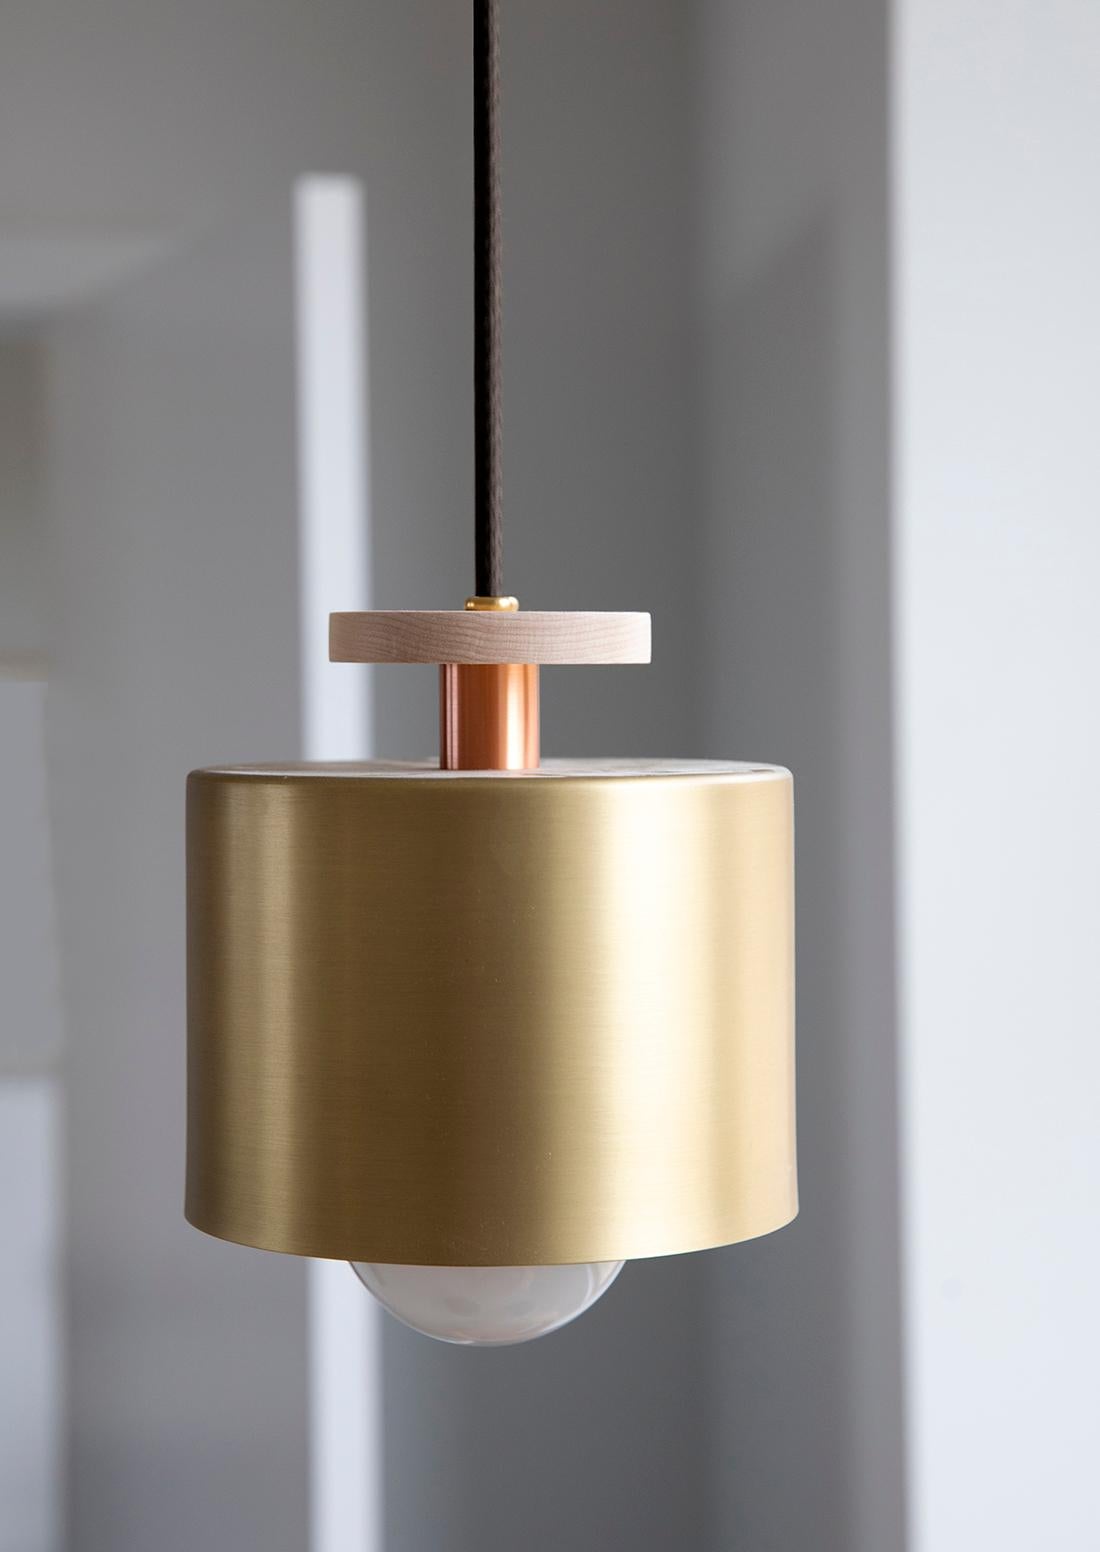 Spun Pendant in Polished Brass with Adjustable Drop light fixture For Sale 3